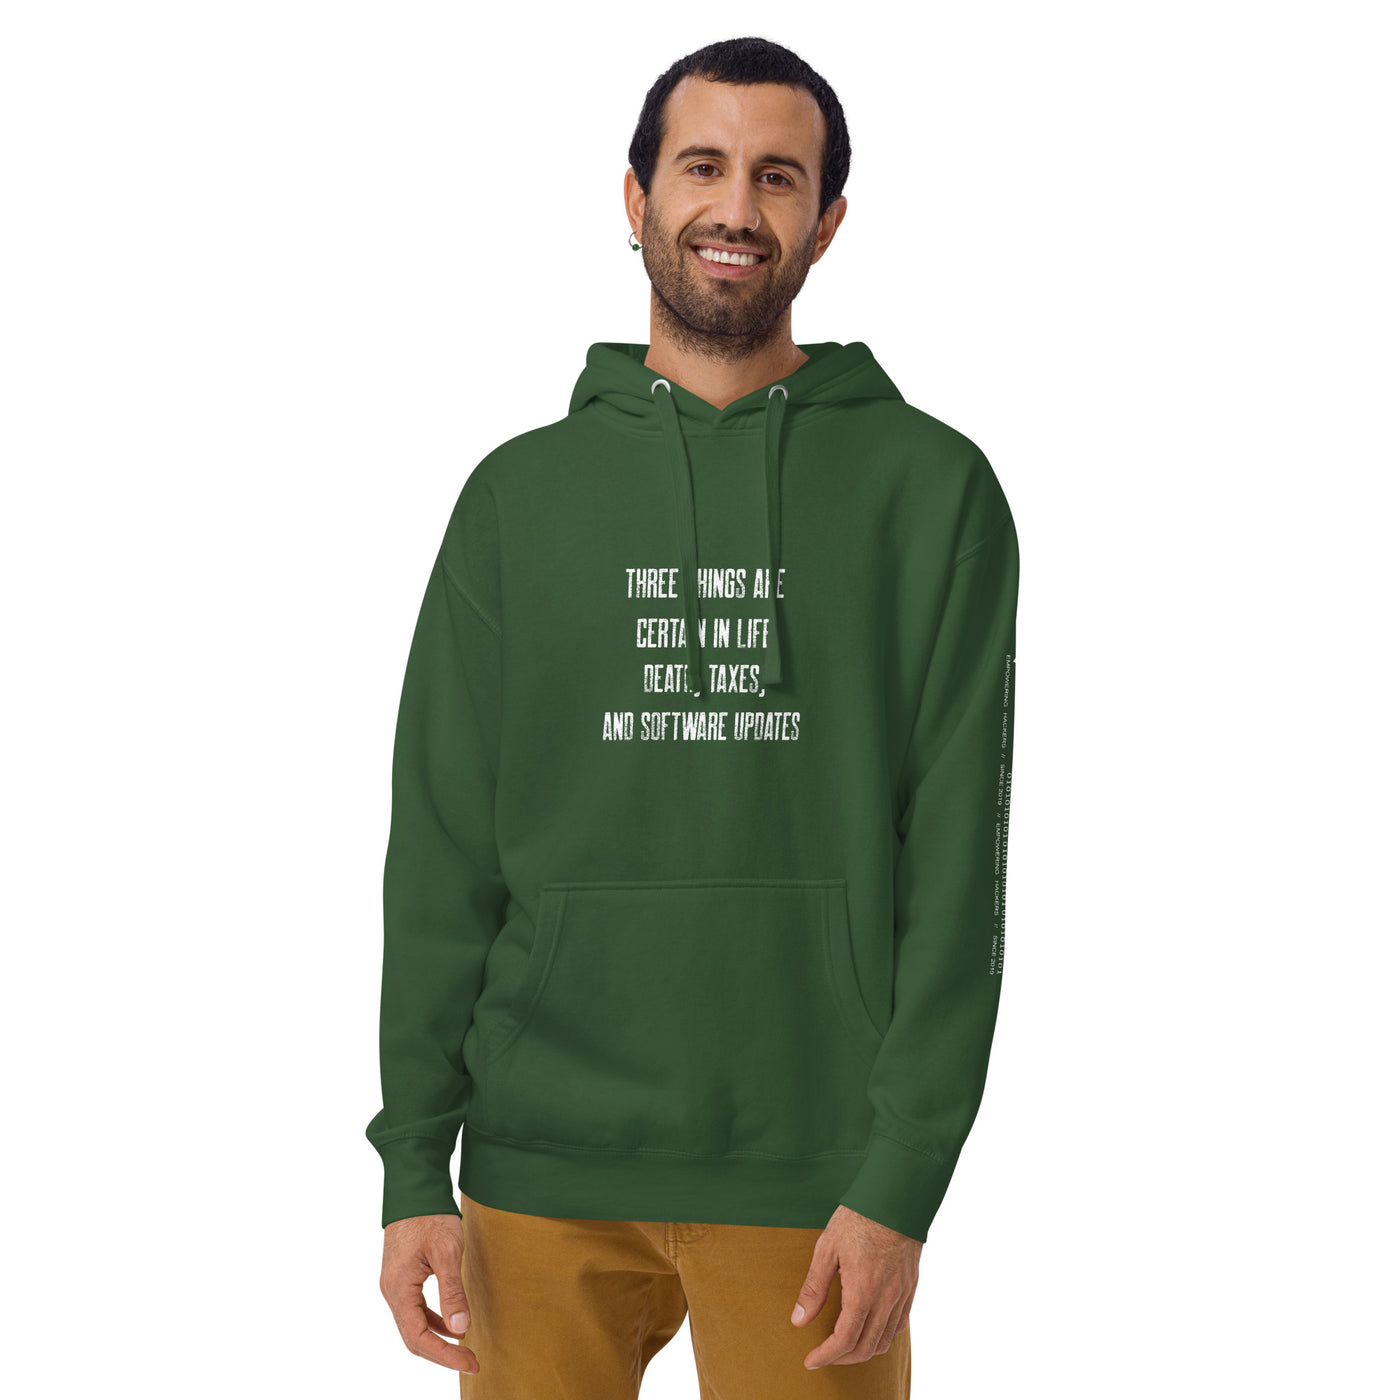 Three Things are certain in life Death, Taxes and Software Updates V2 - Unisex Hoodie